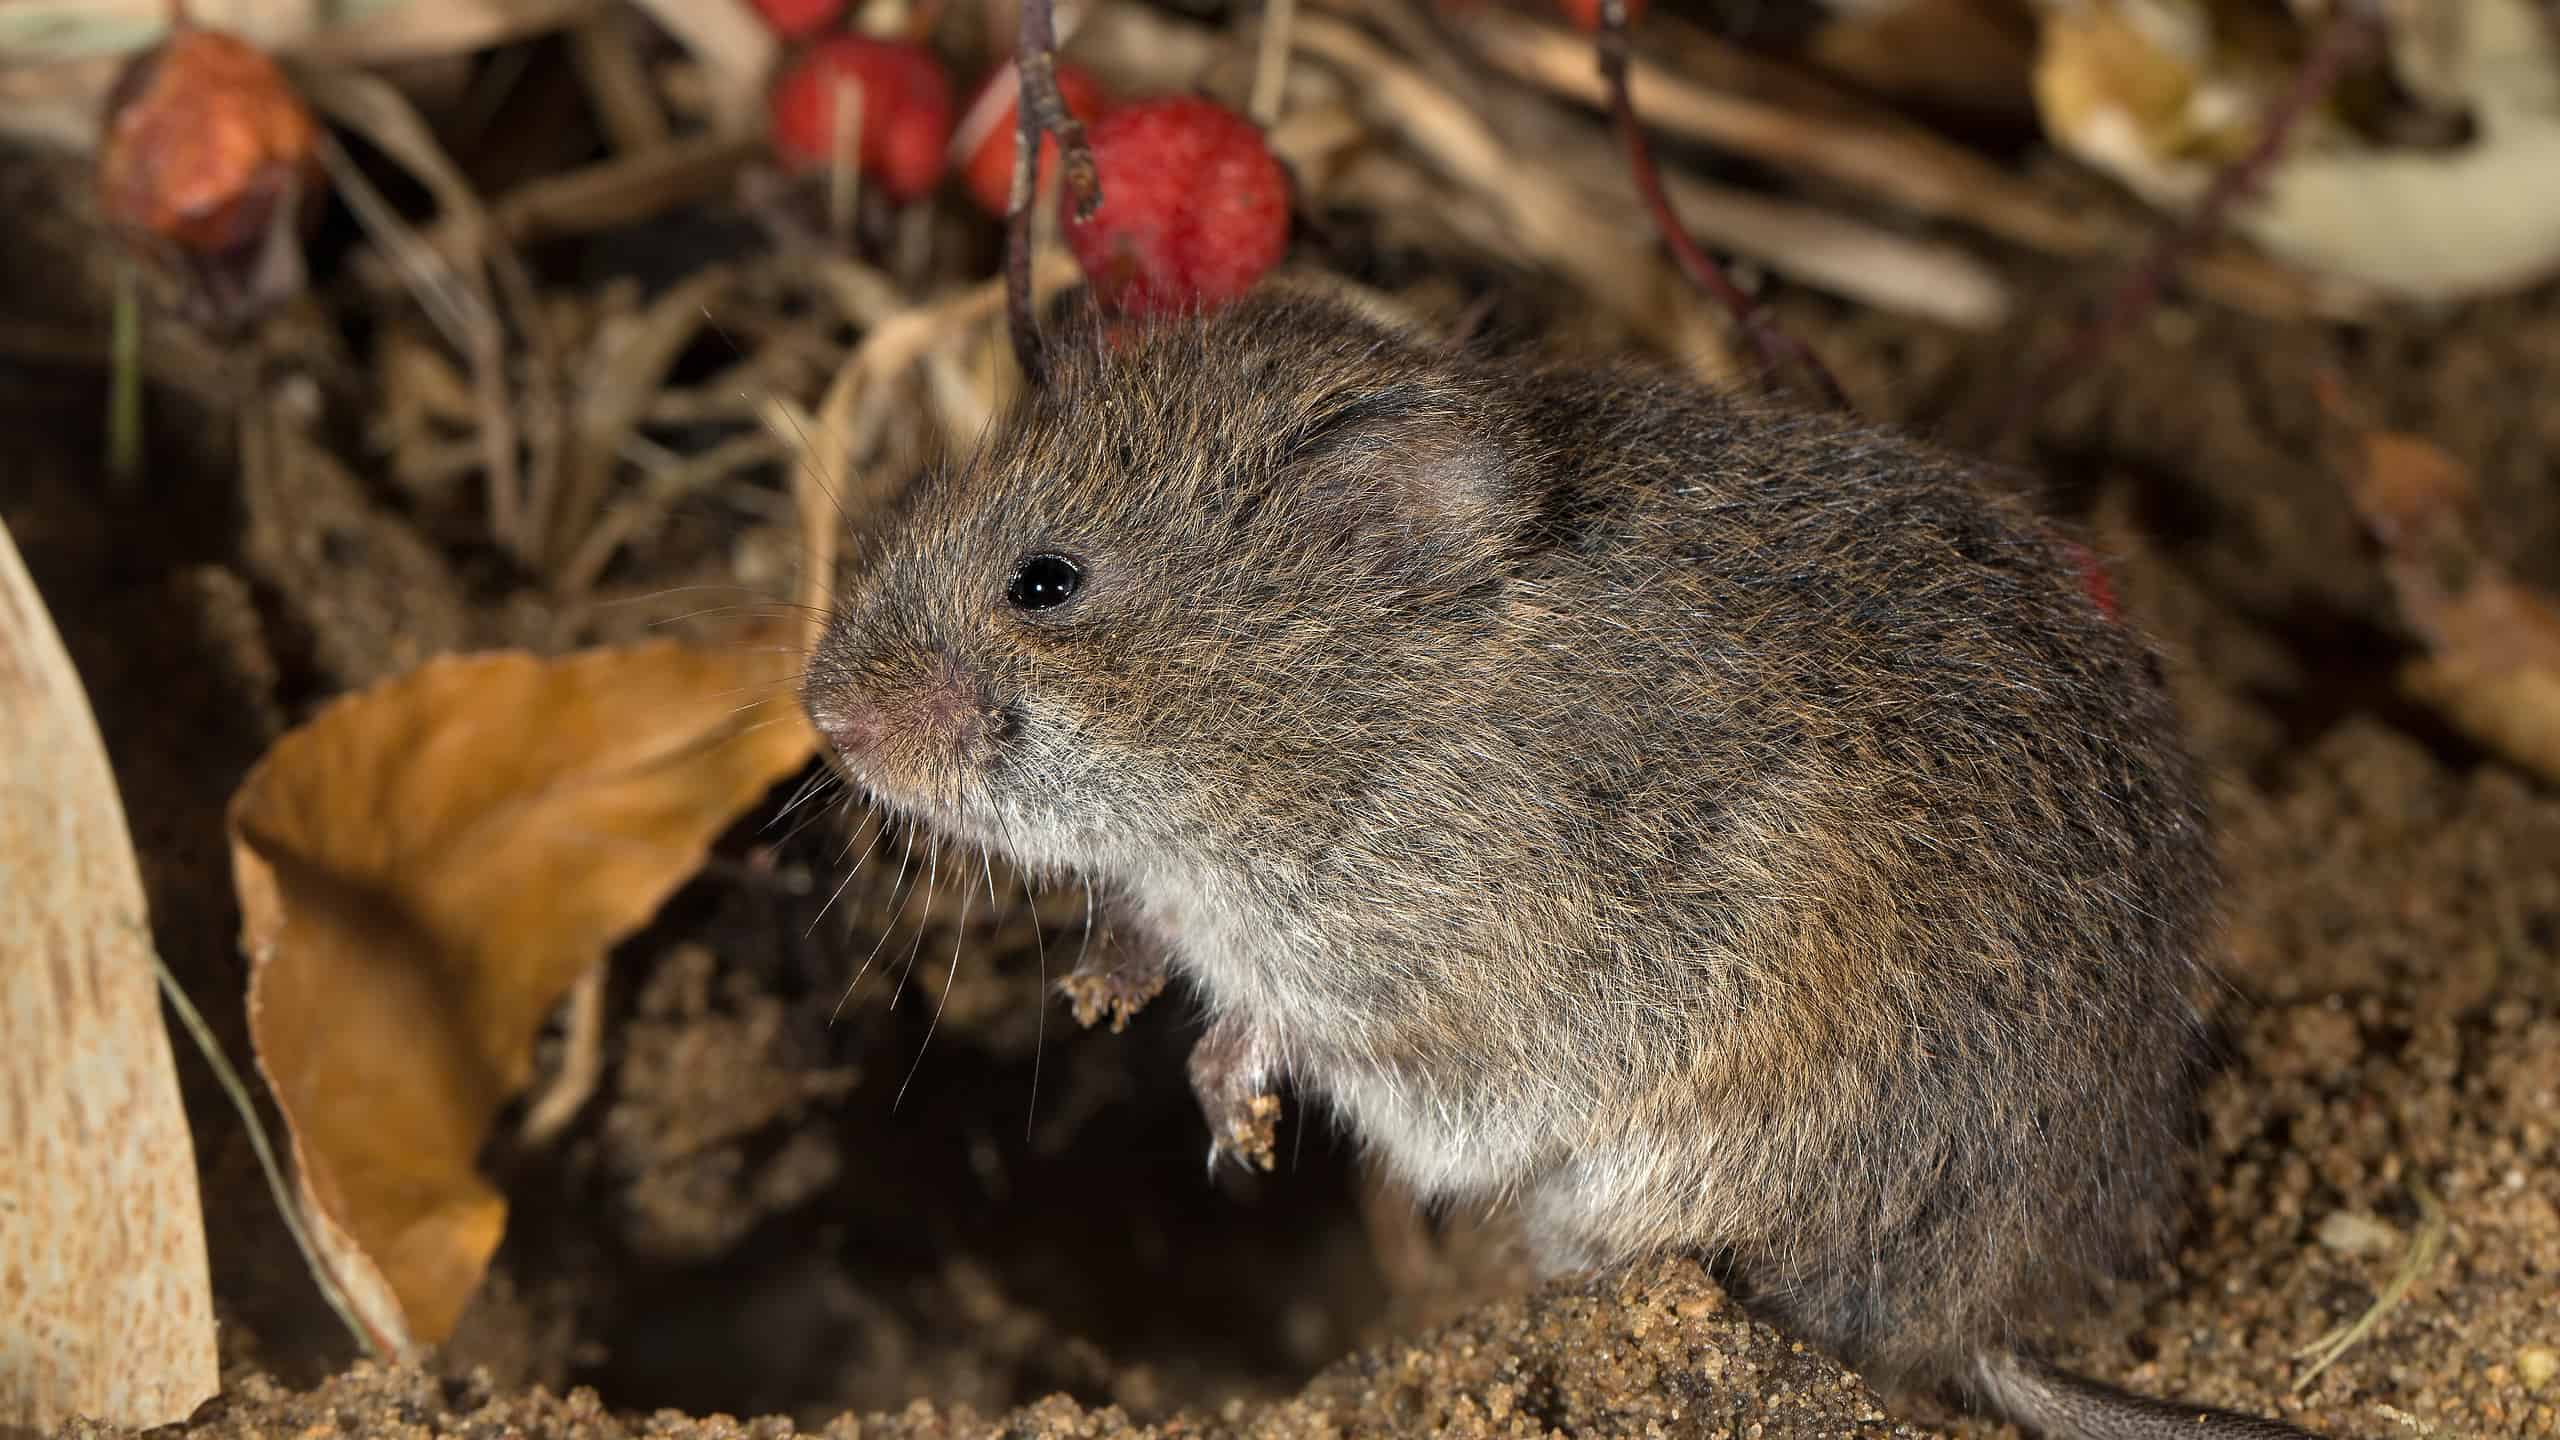 Eastern Meadow Mouse, Field Mouse, or Microtus pennsylvanicus - Rodents in Indiana